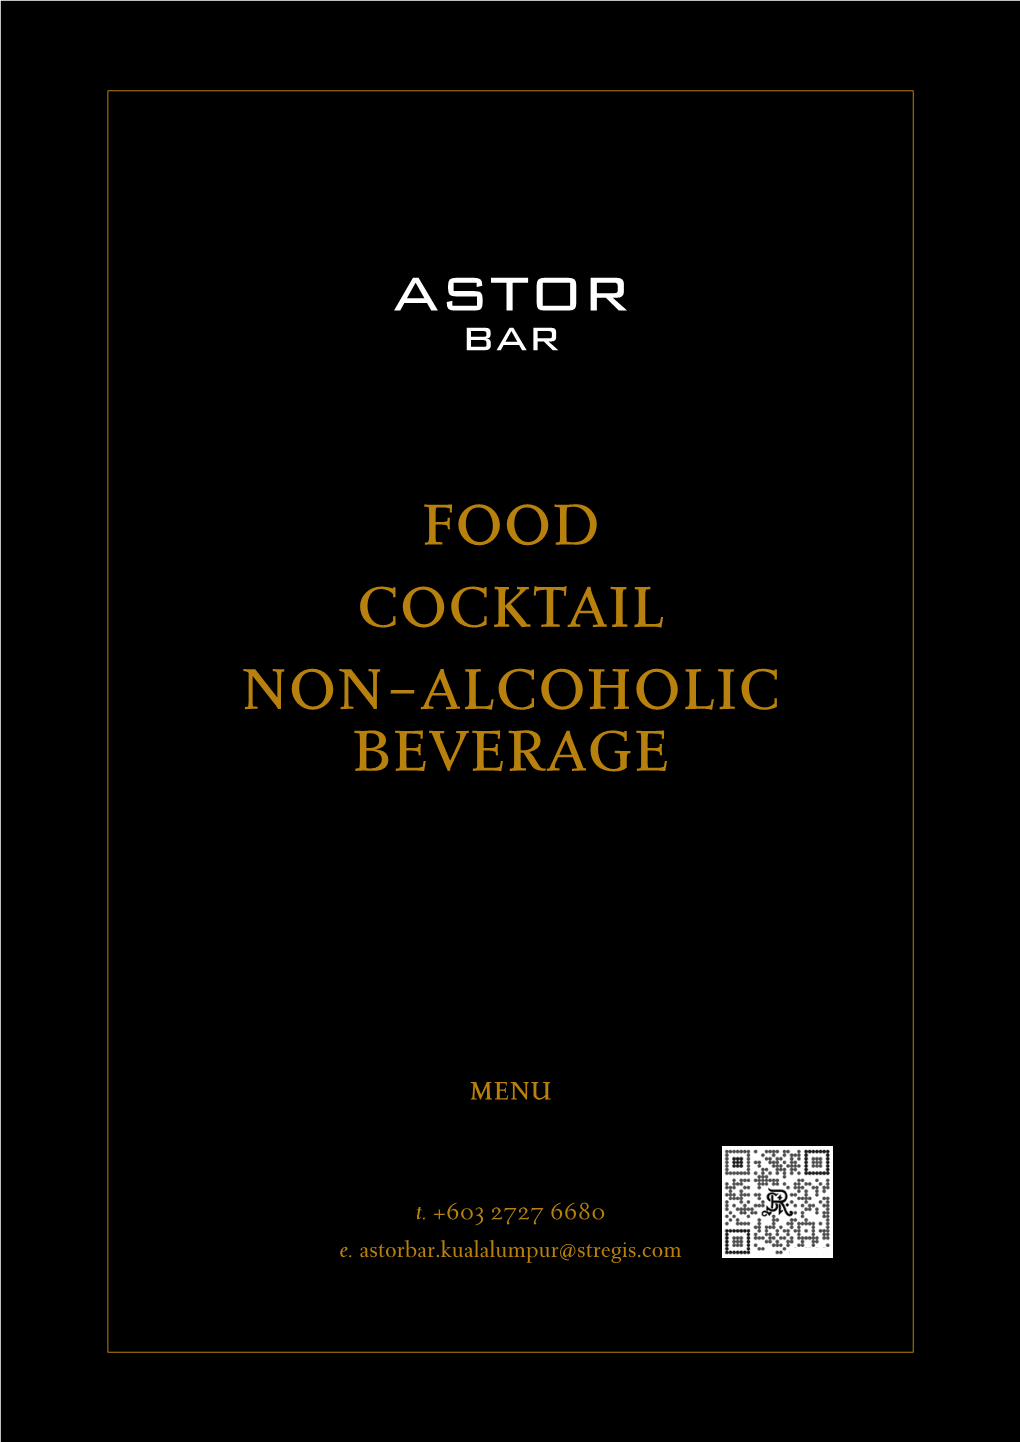 Food Cocktail Non-Alcoholic Beverage